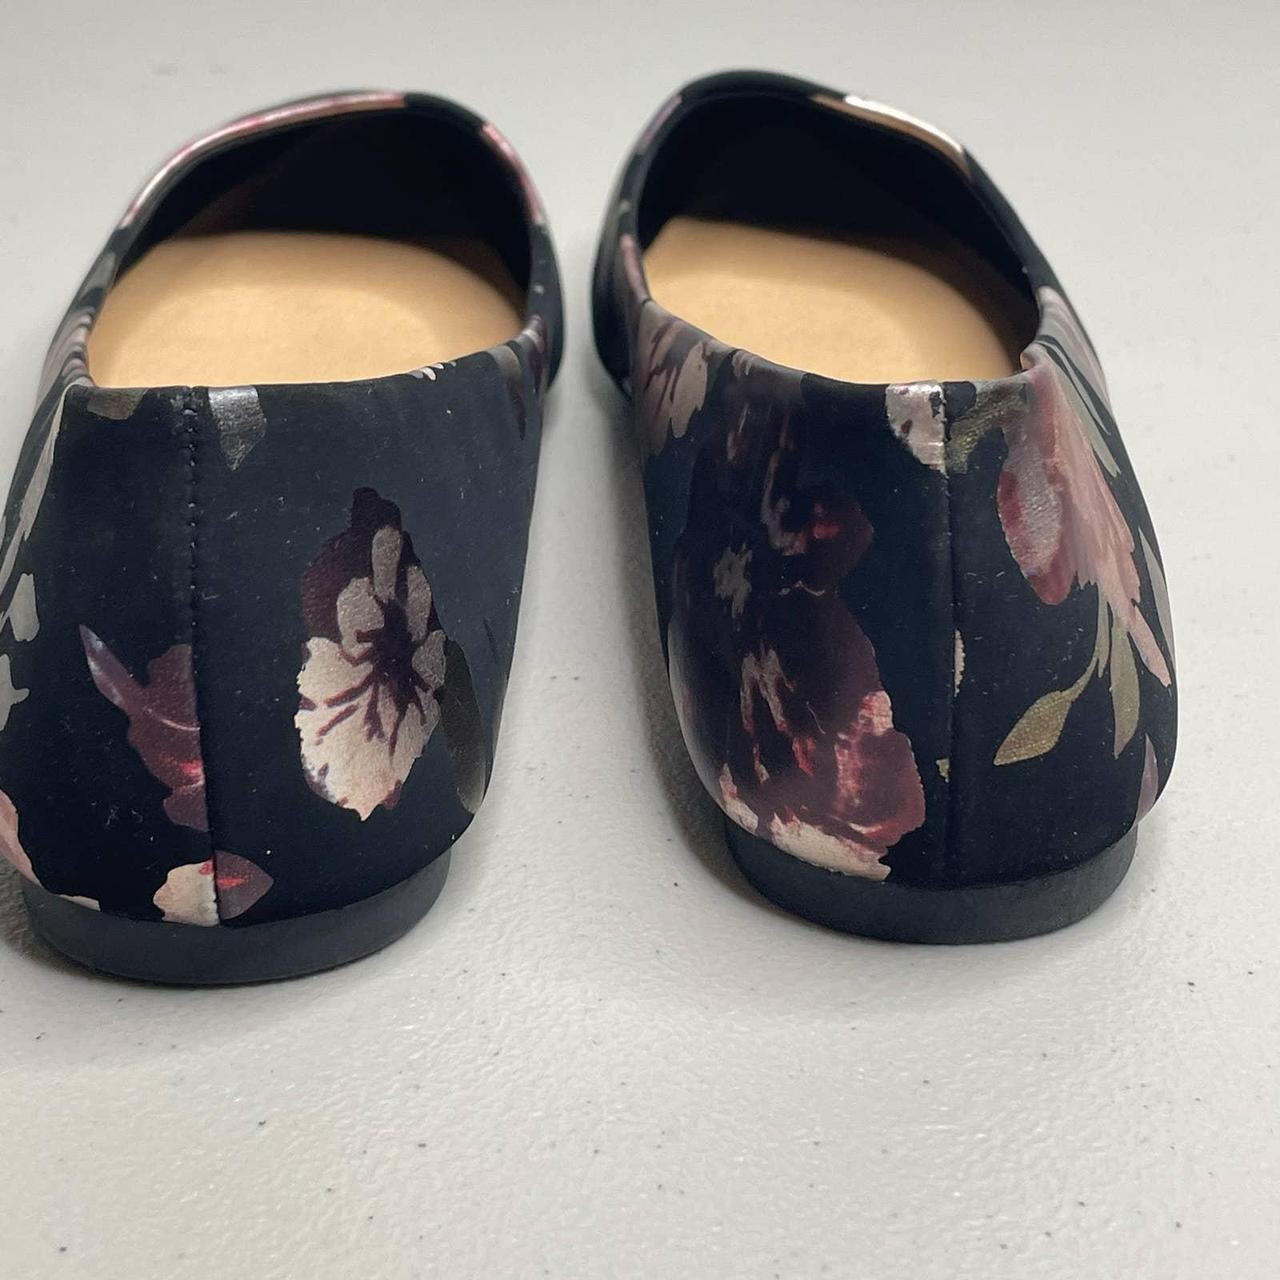 Christian Siriano for Payless Floral Flats - Depop